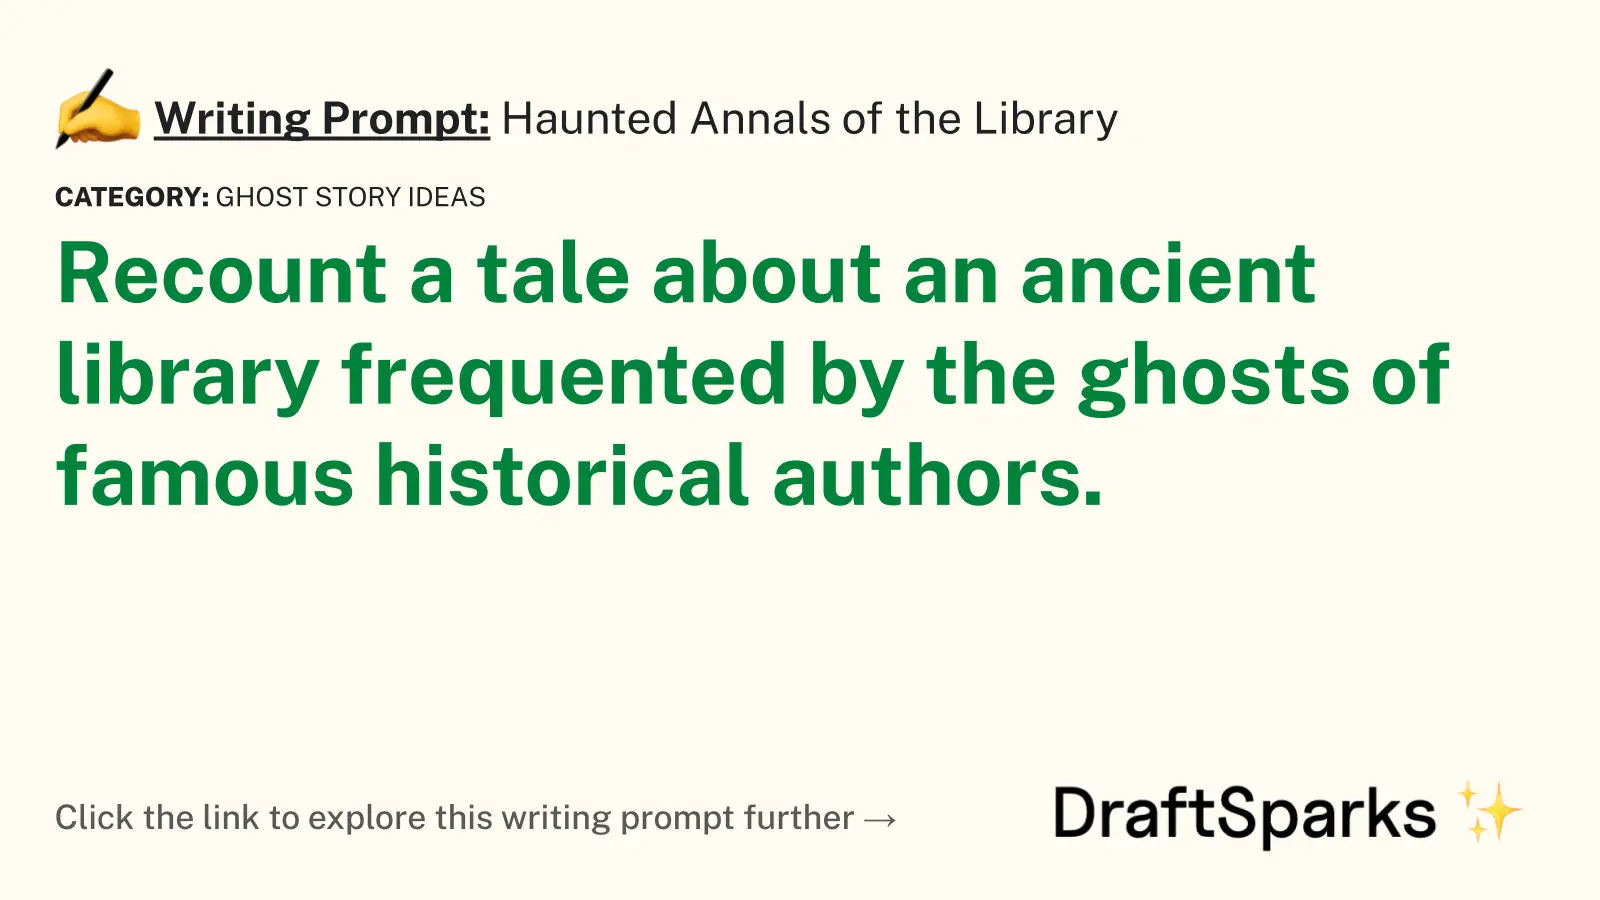 Haunted Annals of the Library